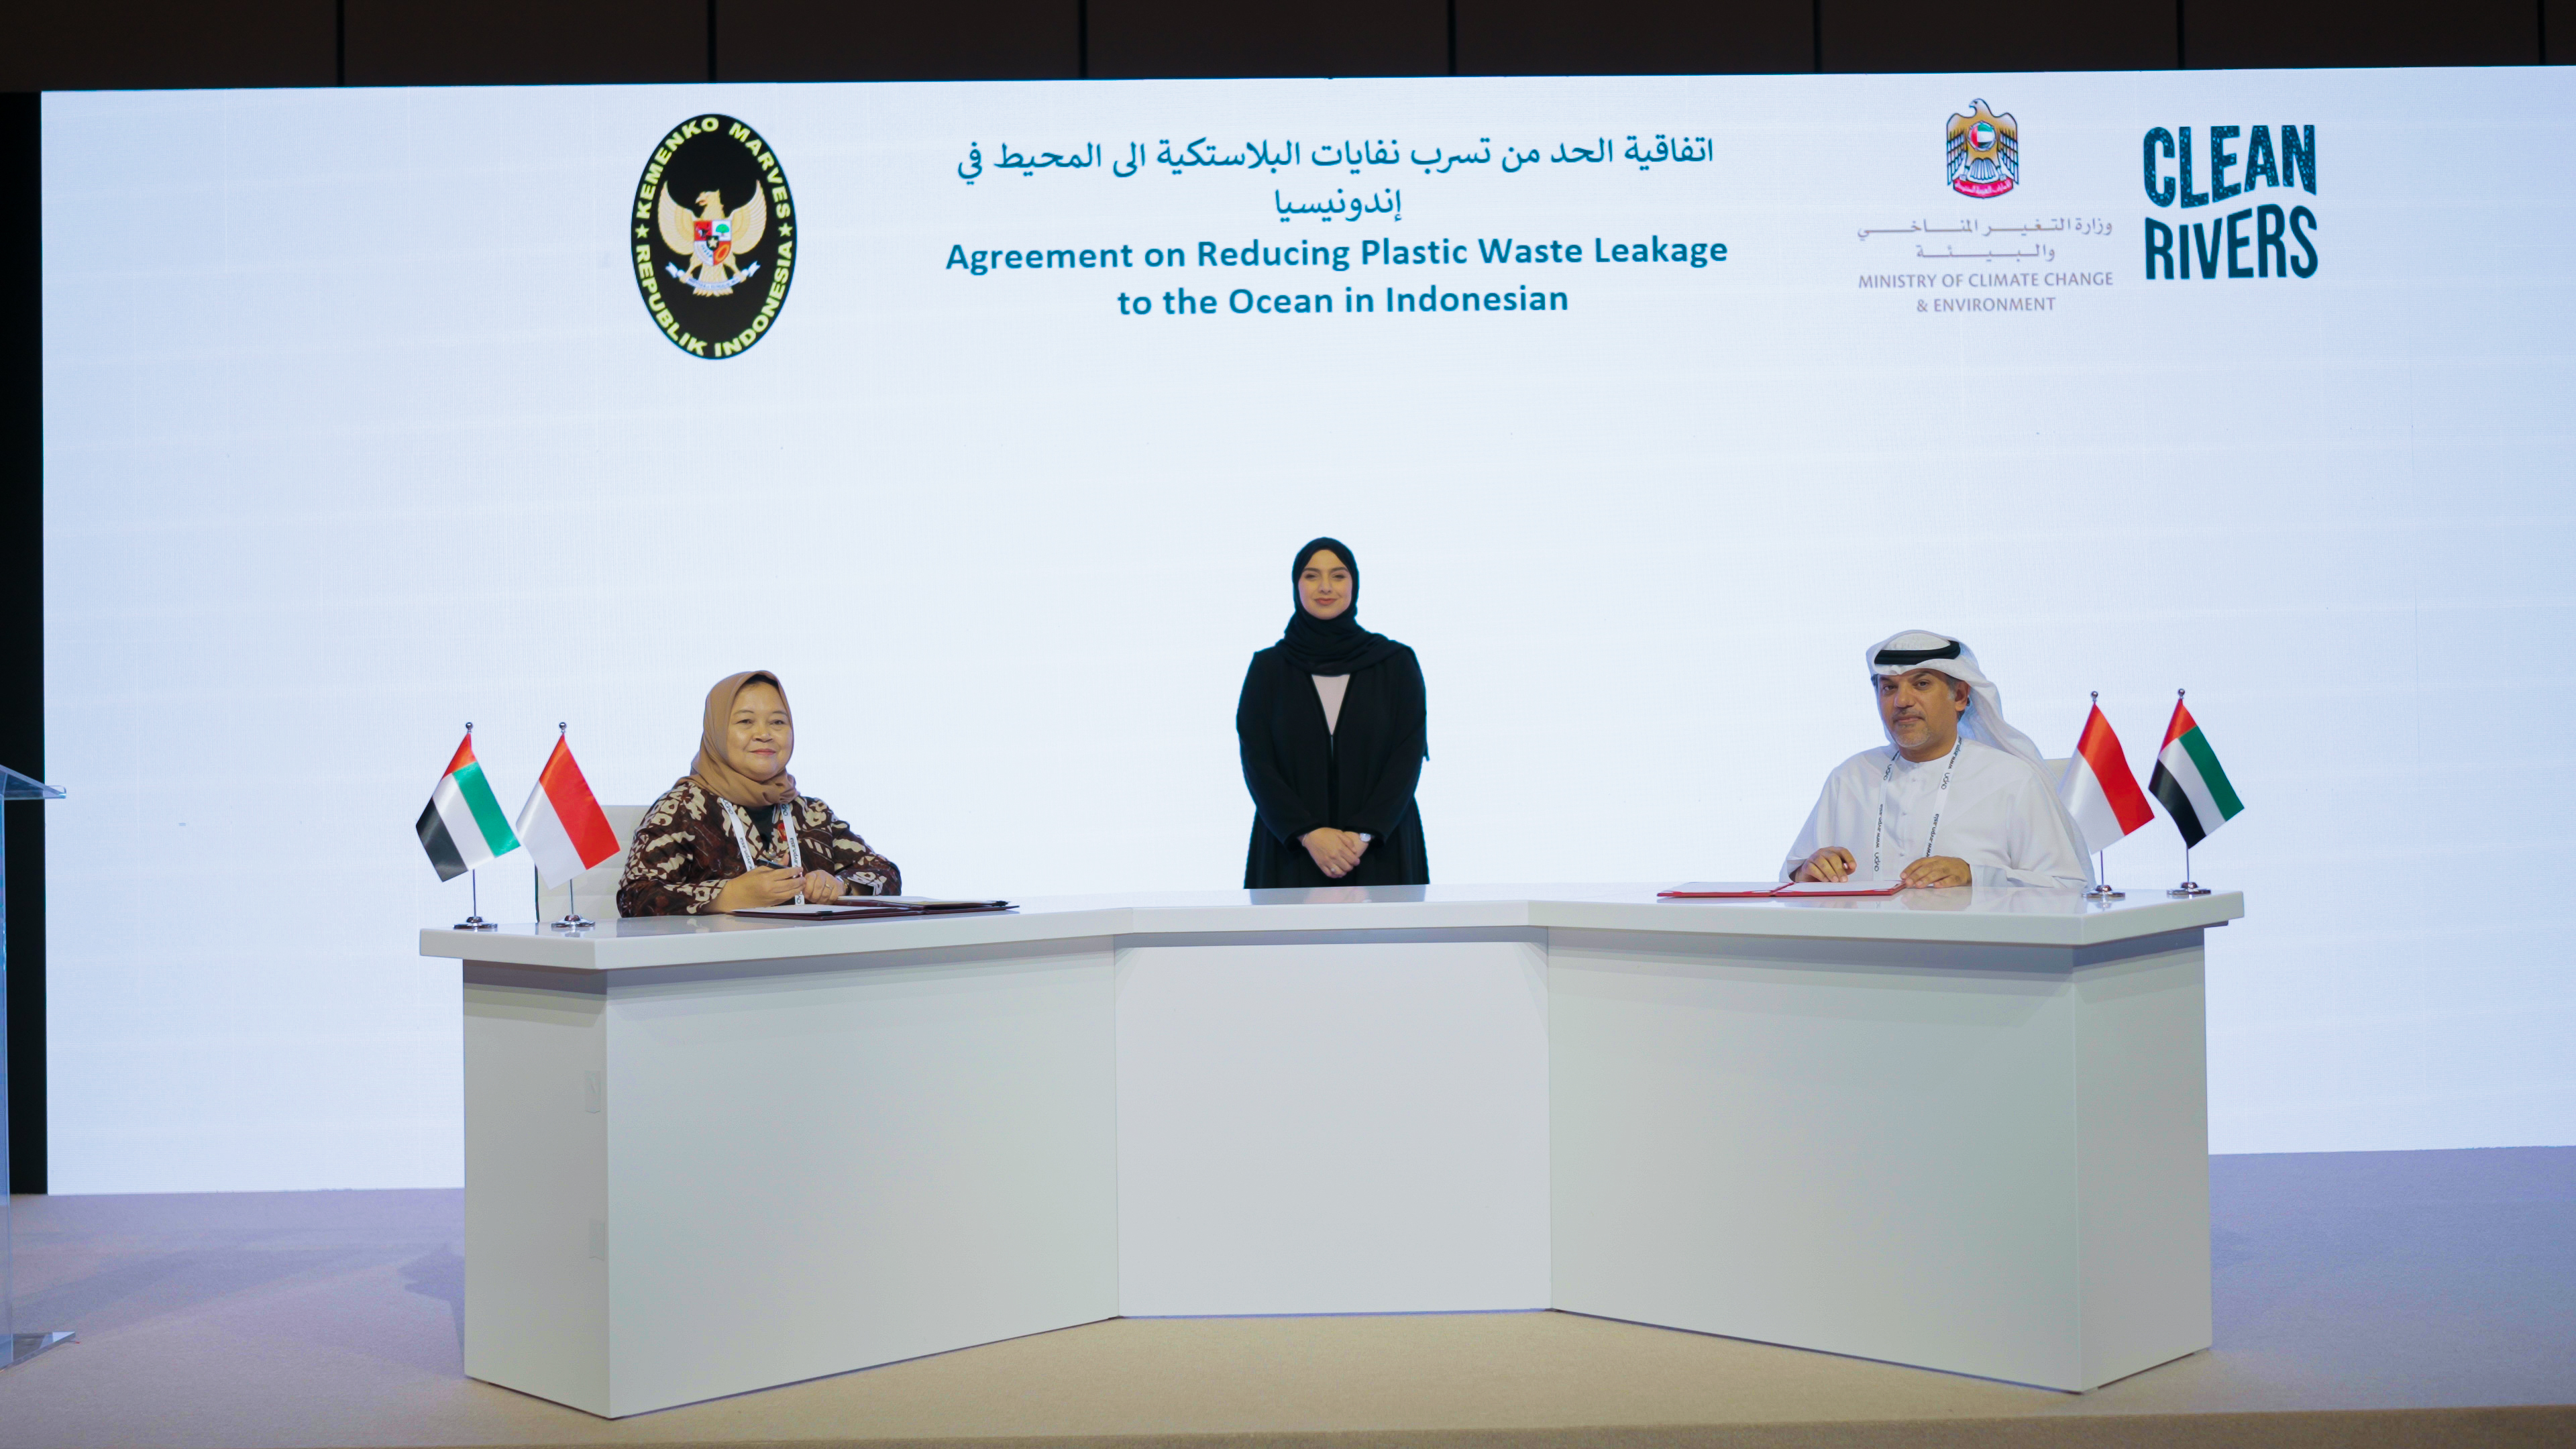 uae, indonesia partner to reduce waste leakage into oceans and rivers